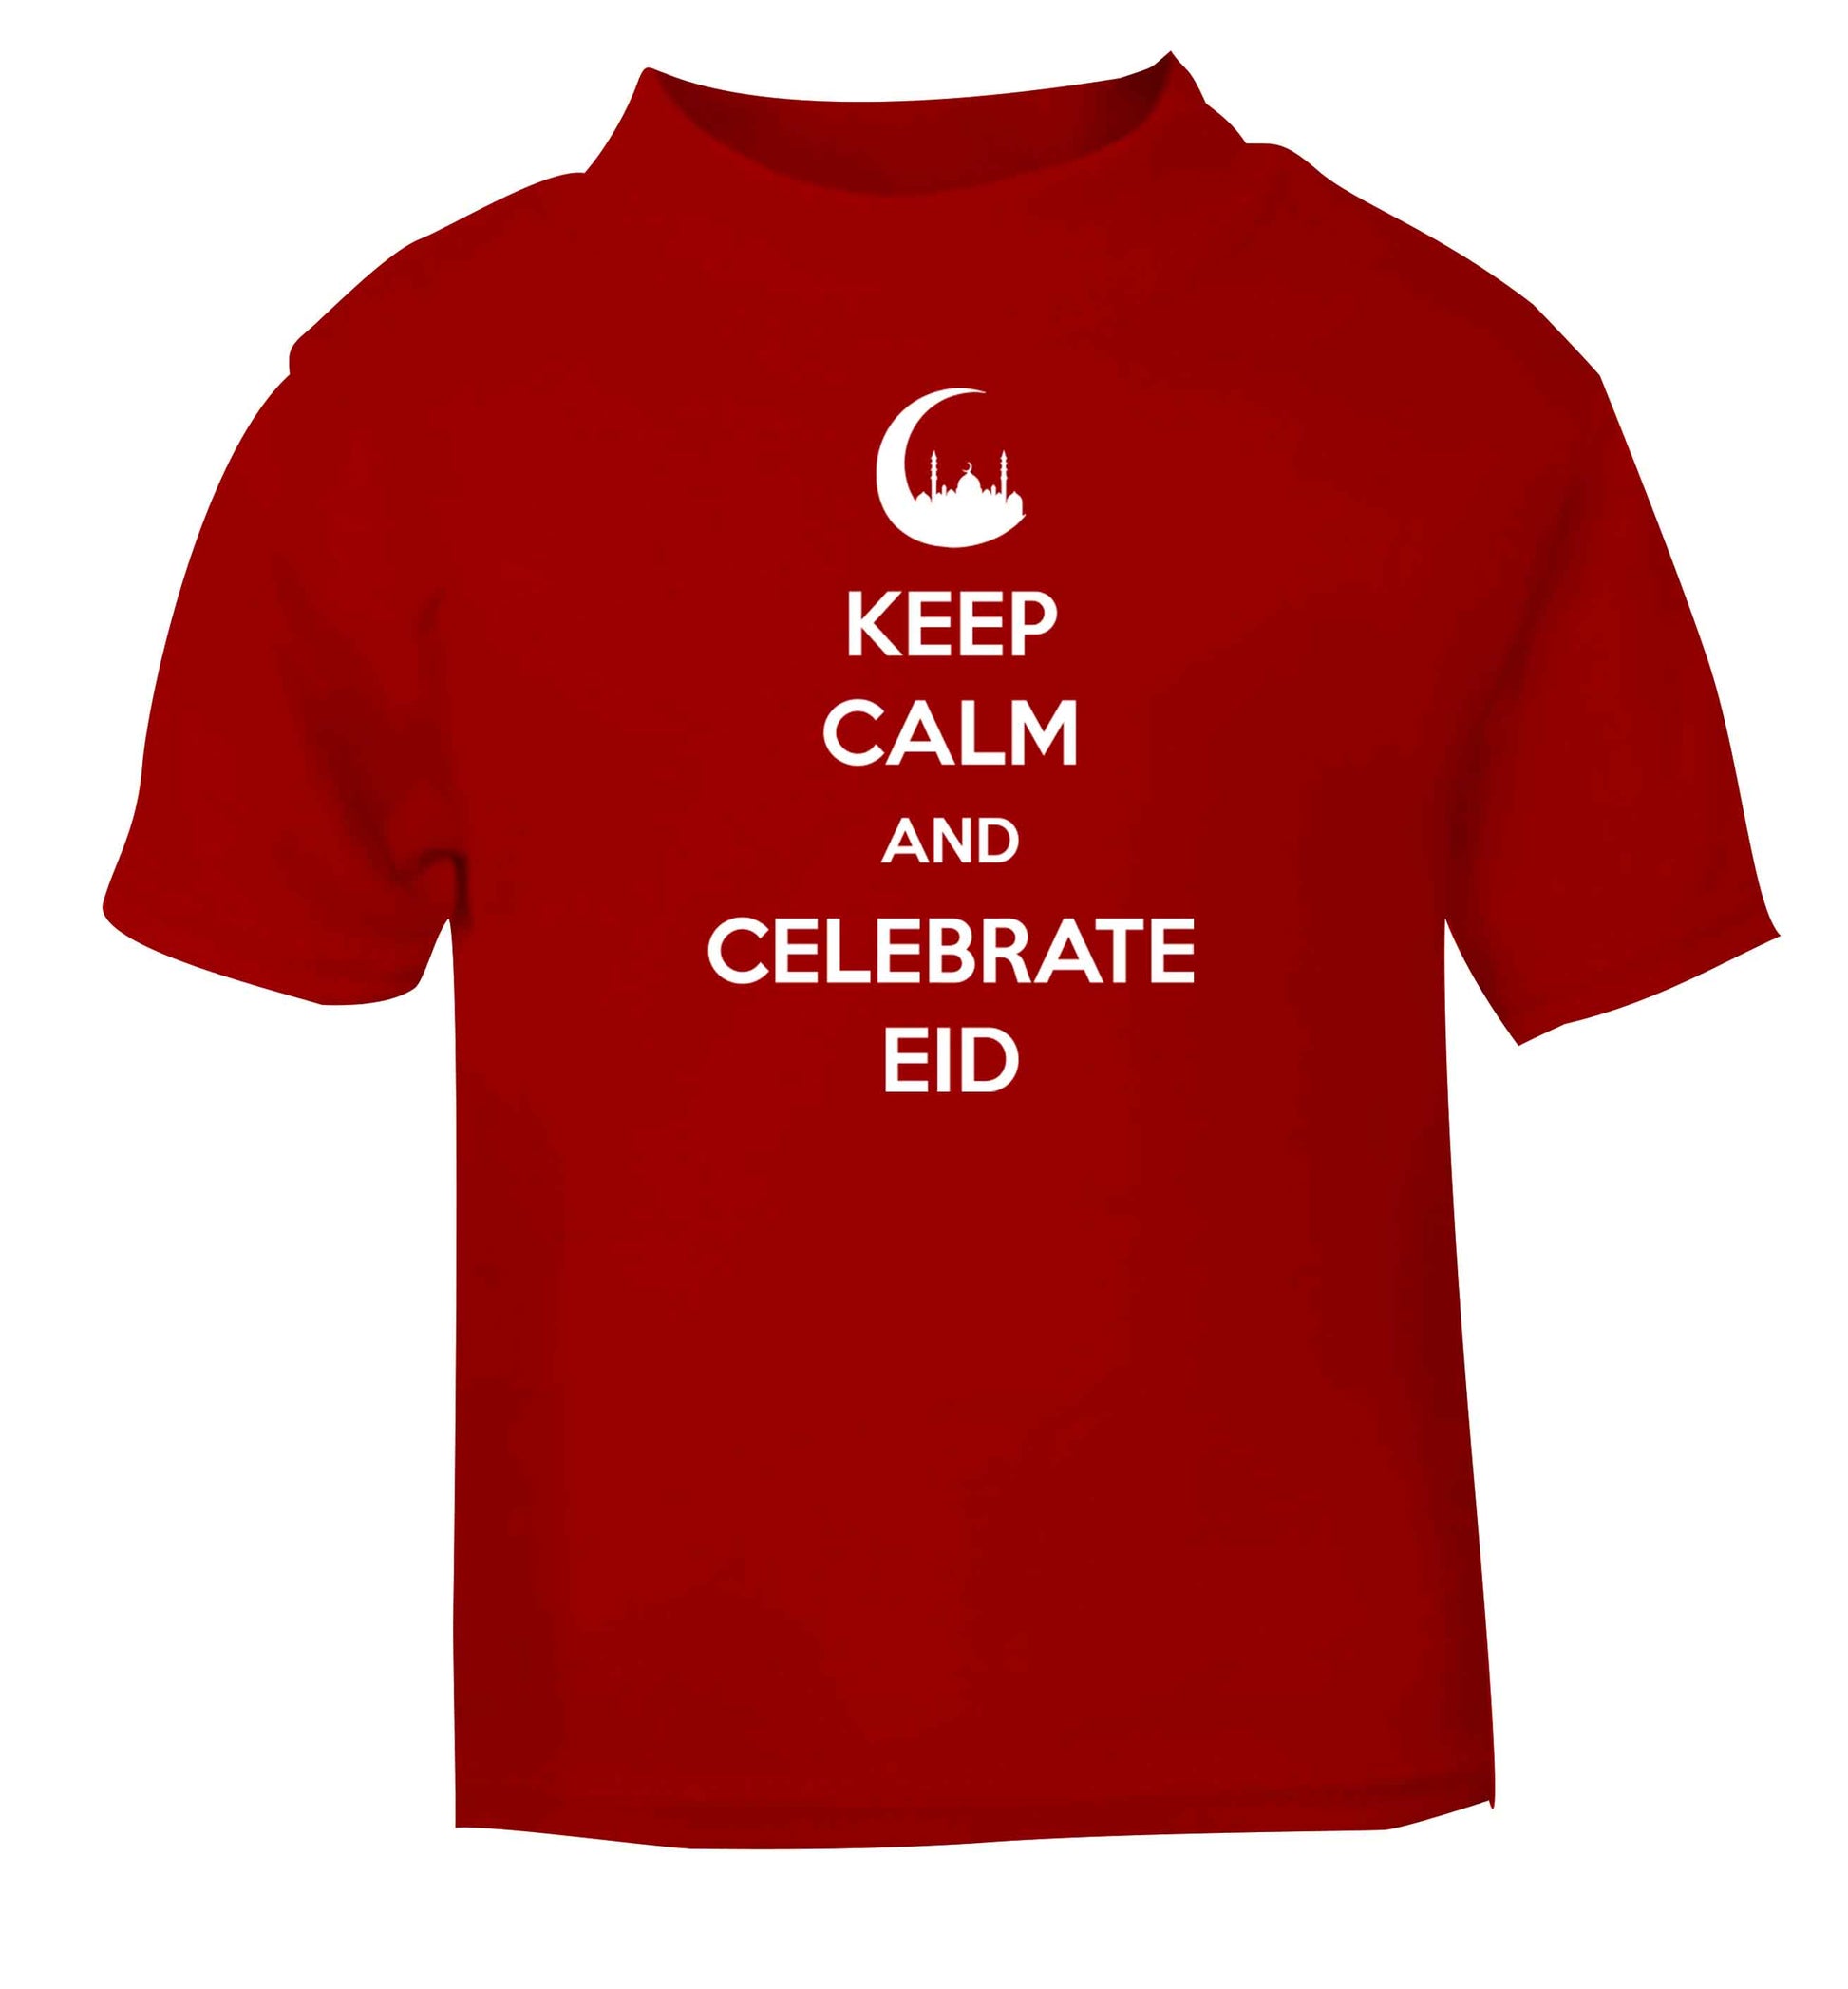 Keep calm and celebrate Eid red baby toddler Tshirt 2 Years